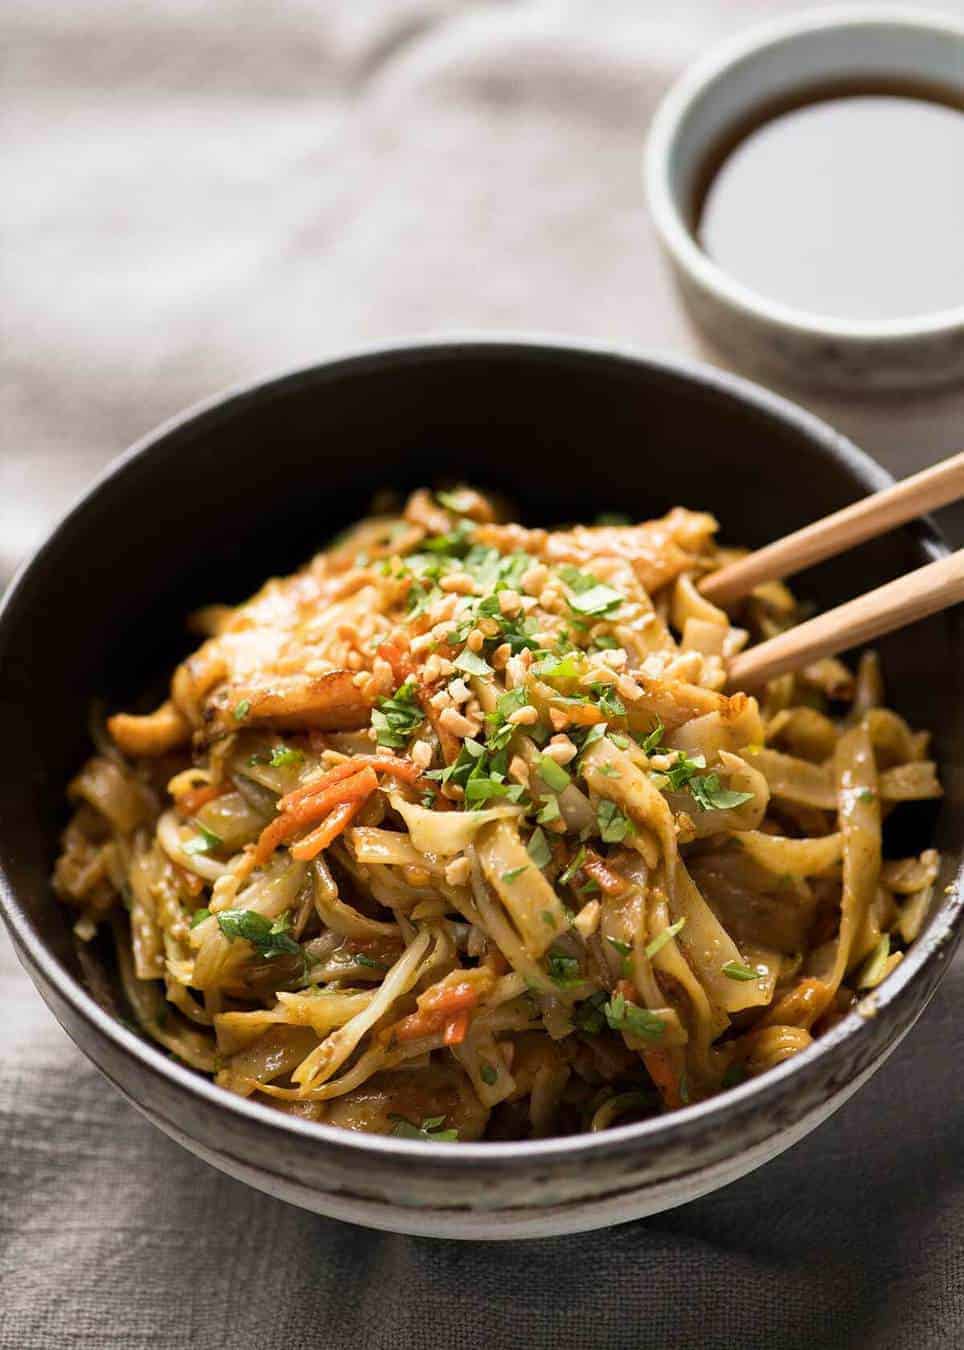 Stir Fried Noodles with Peanut Sauce - tastes like satay peanut stir fries you get at Chinese restaurants in Australia. So easy and SO GOOD! recipetineats.com